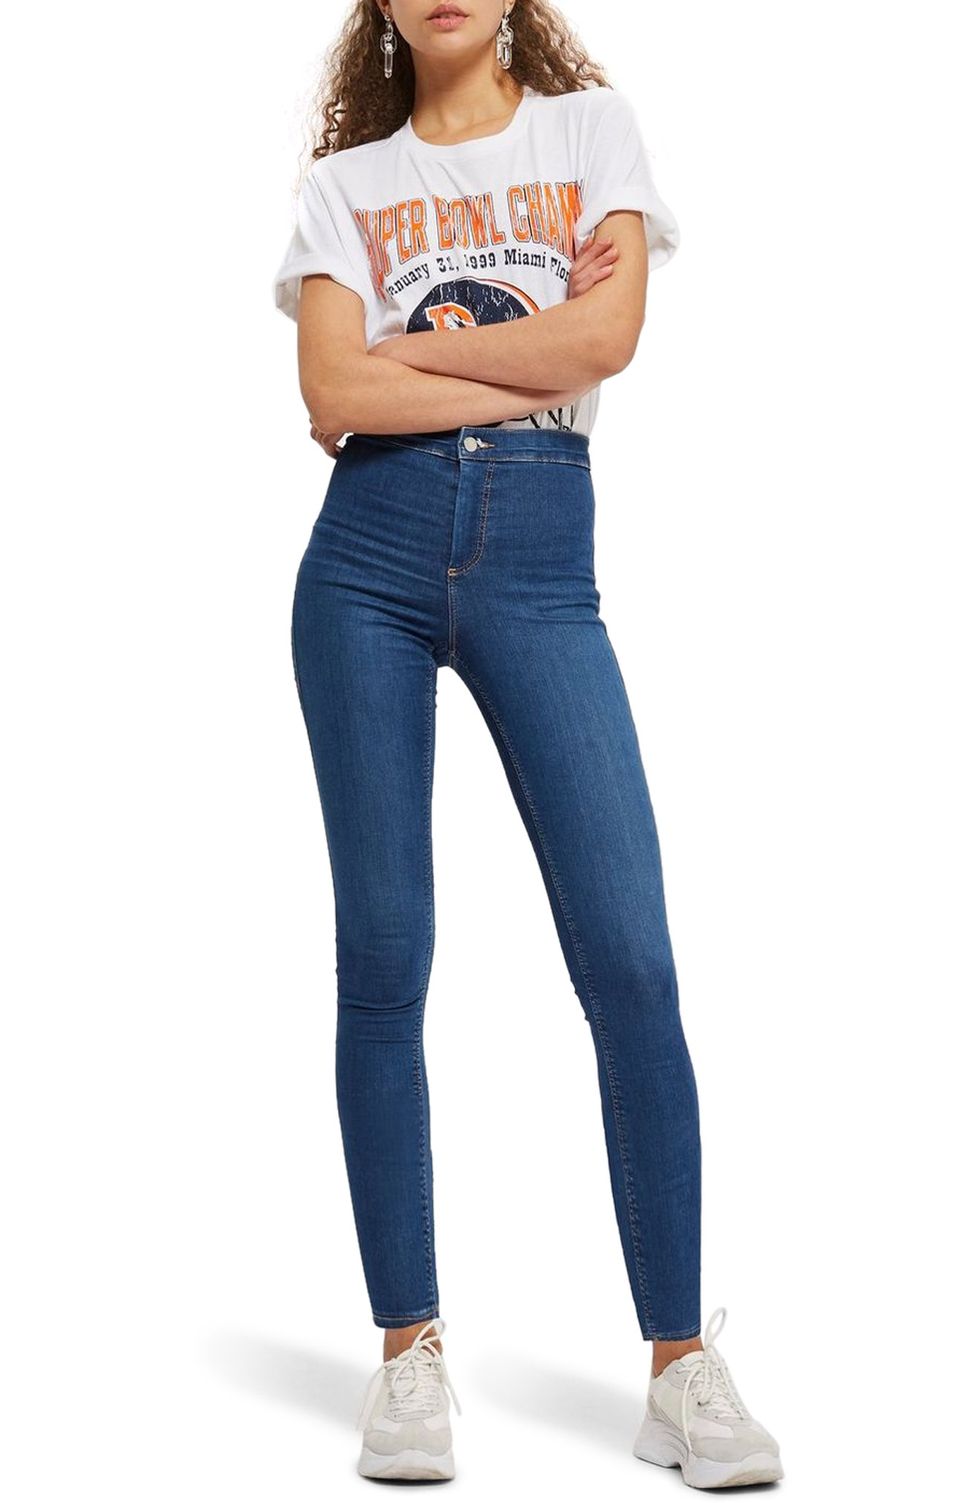 Topshop Mom Jeans Try On - Finding the Perfect Petite Pair